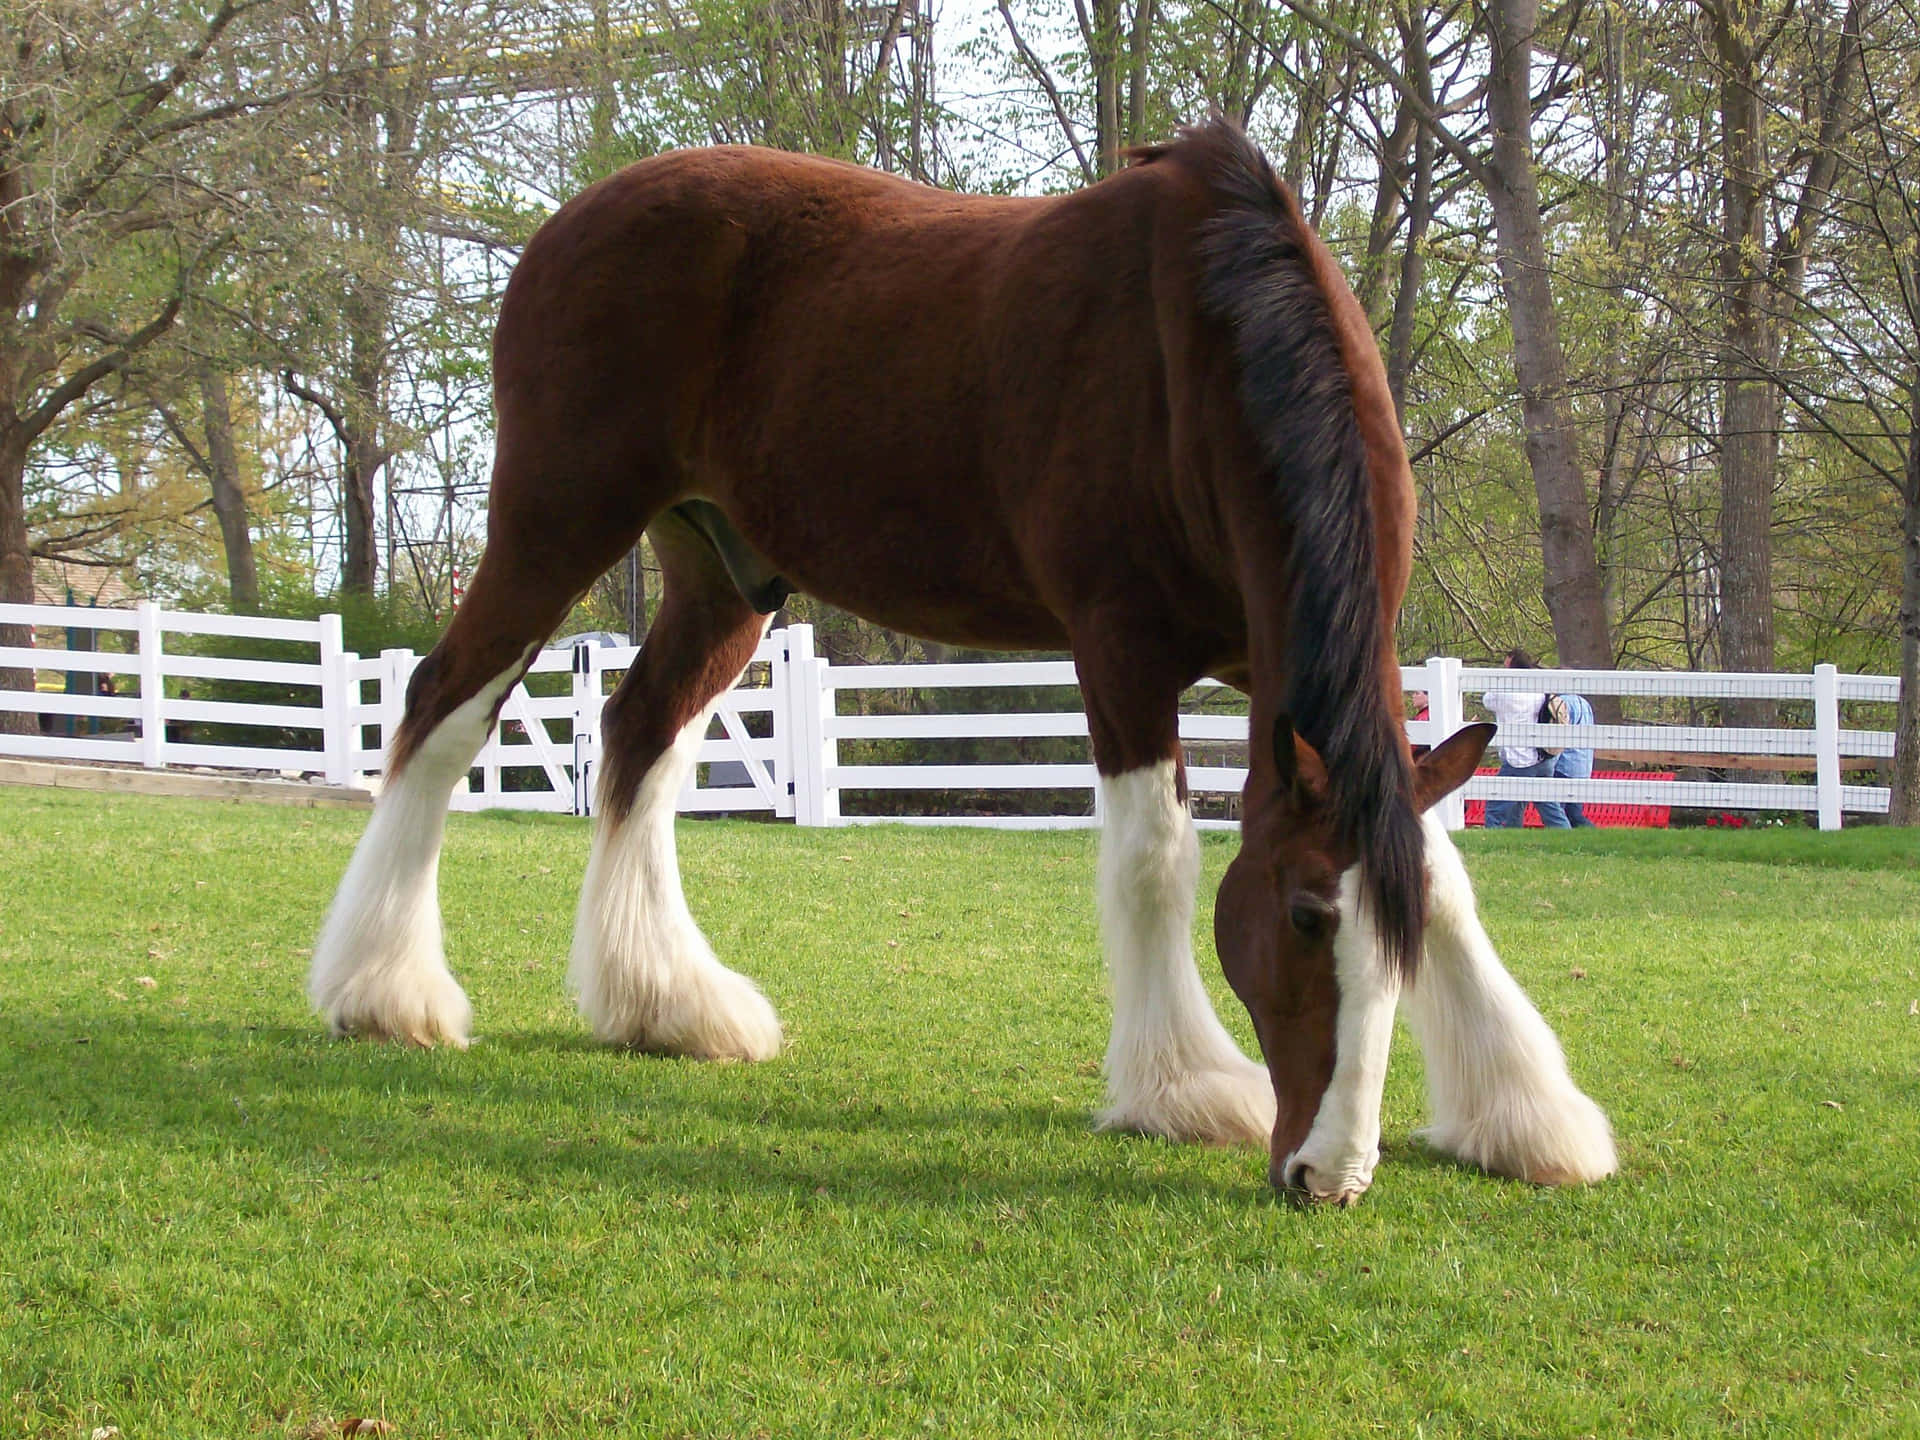 A Majestic Clydesdale Horse Galloping Through a Wooded Field